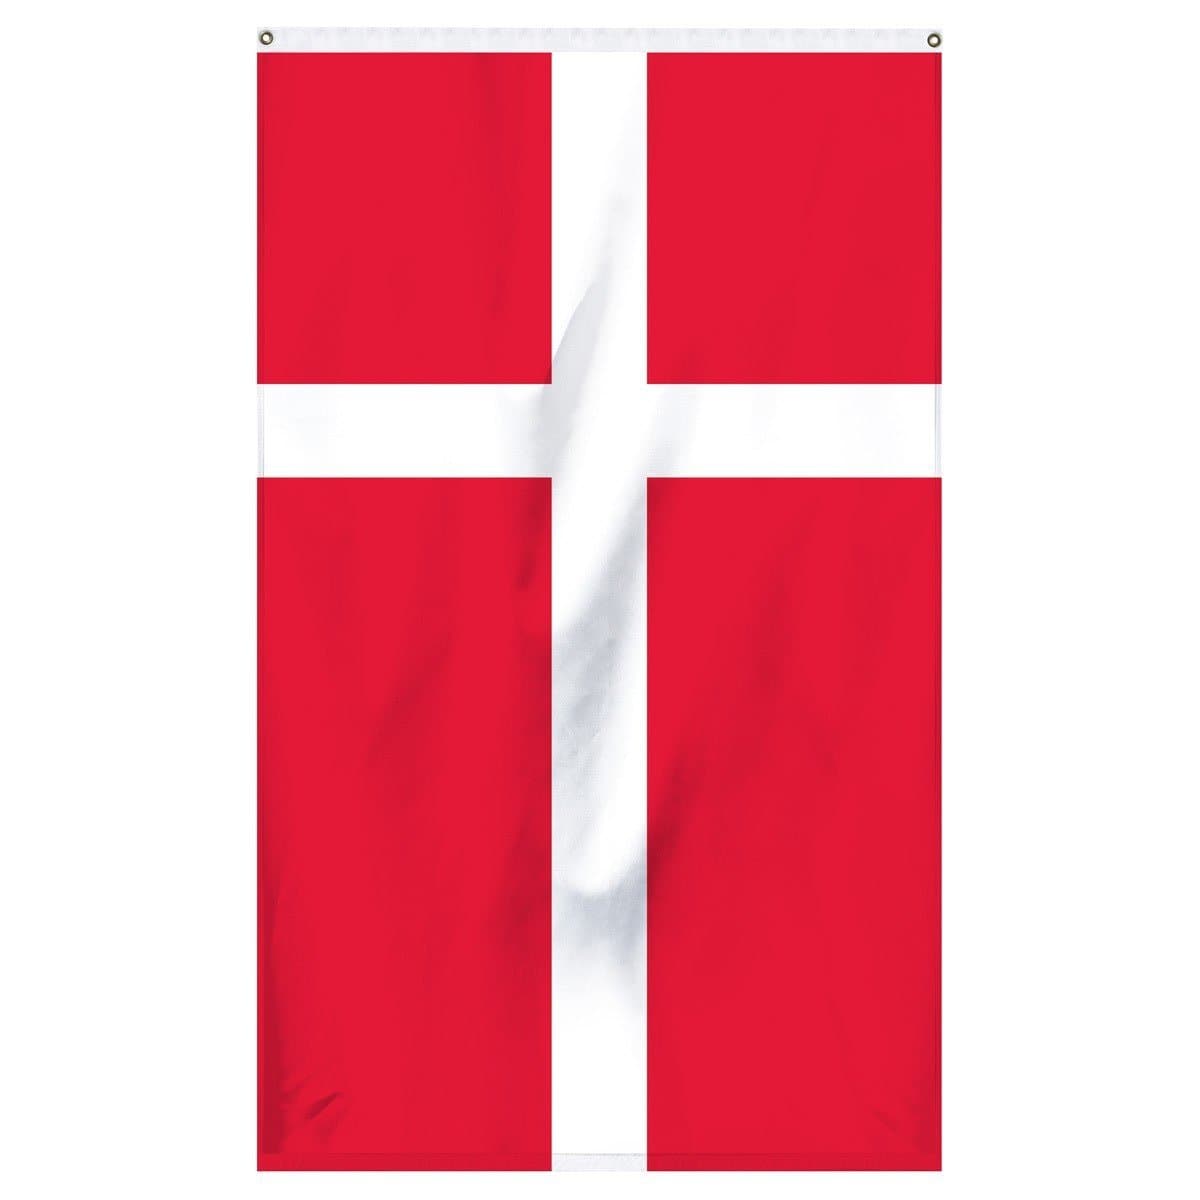 The national flag of Denmark for sale perfect for flagpoles and parades